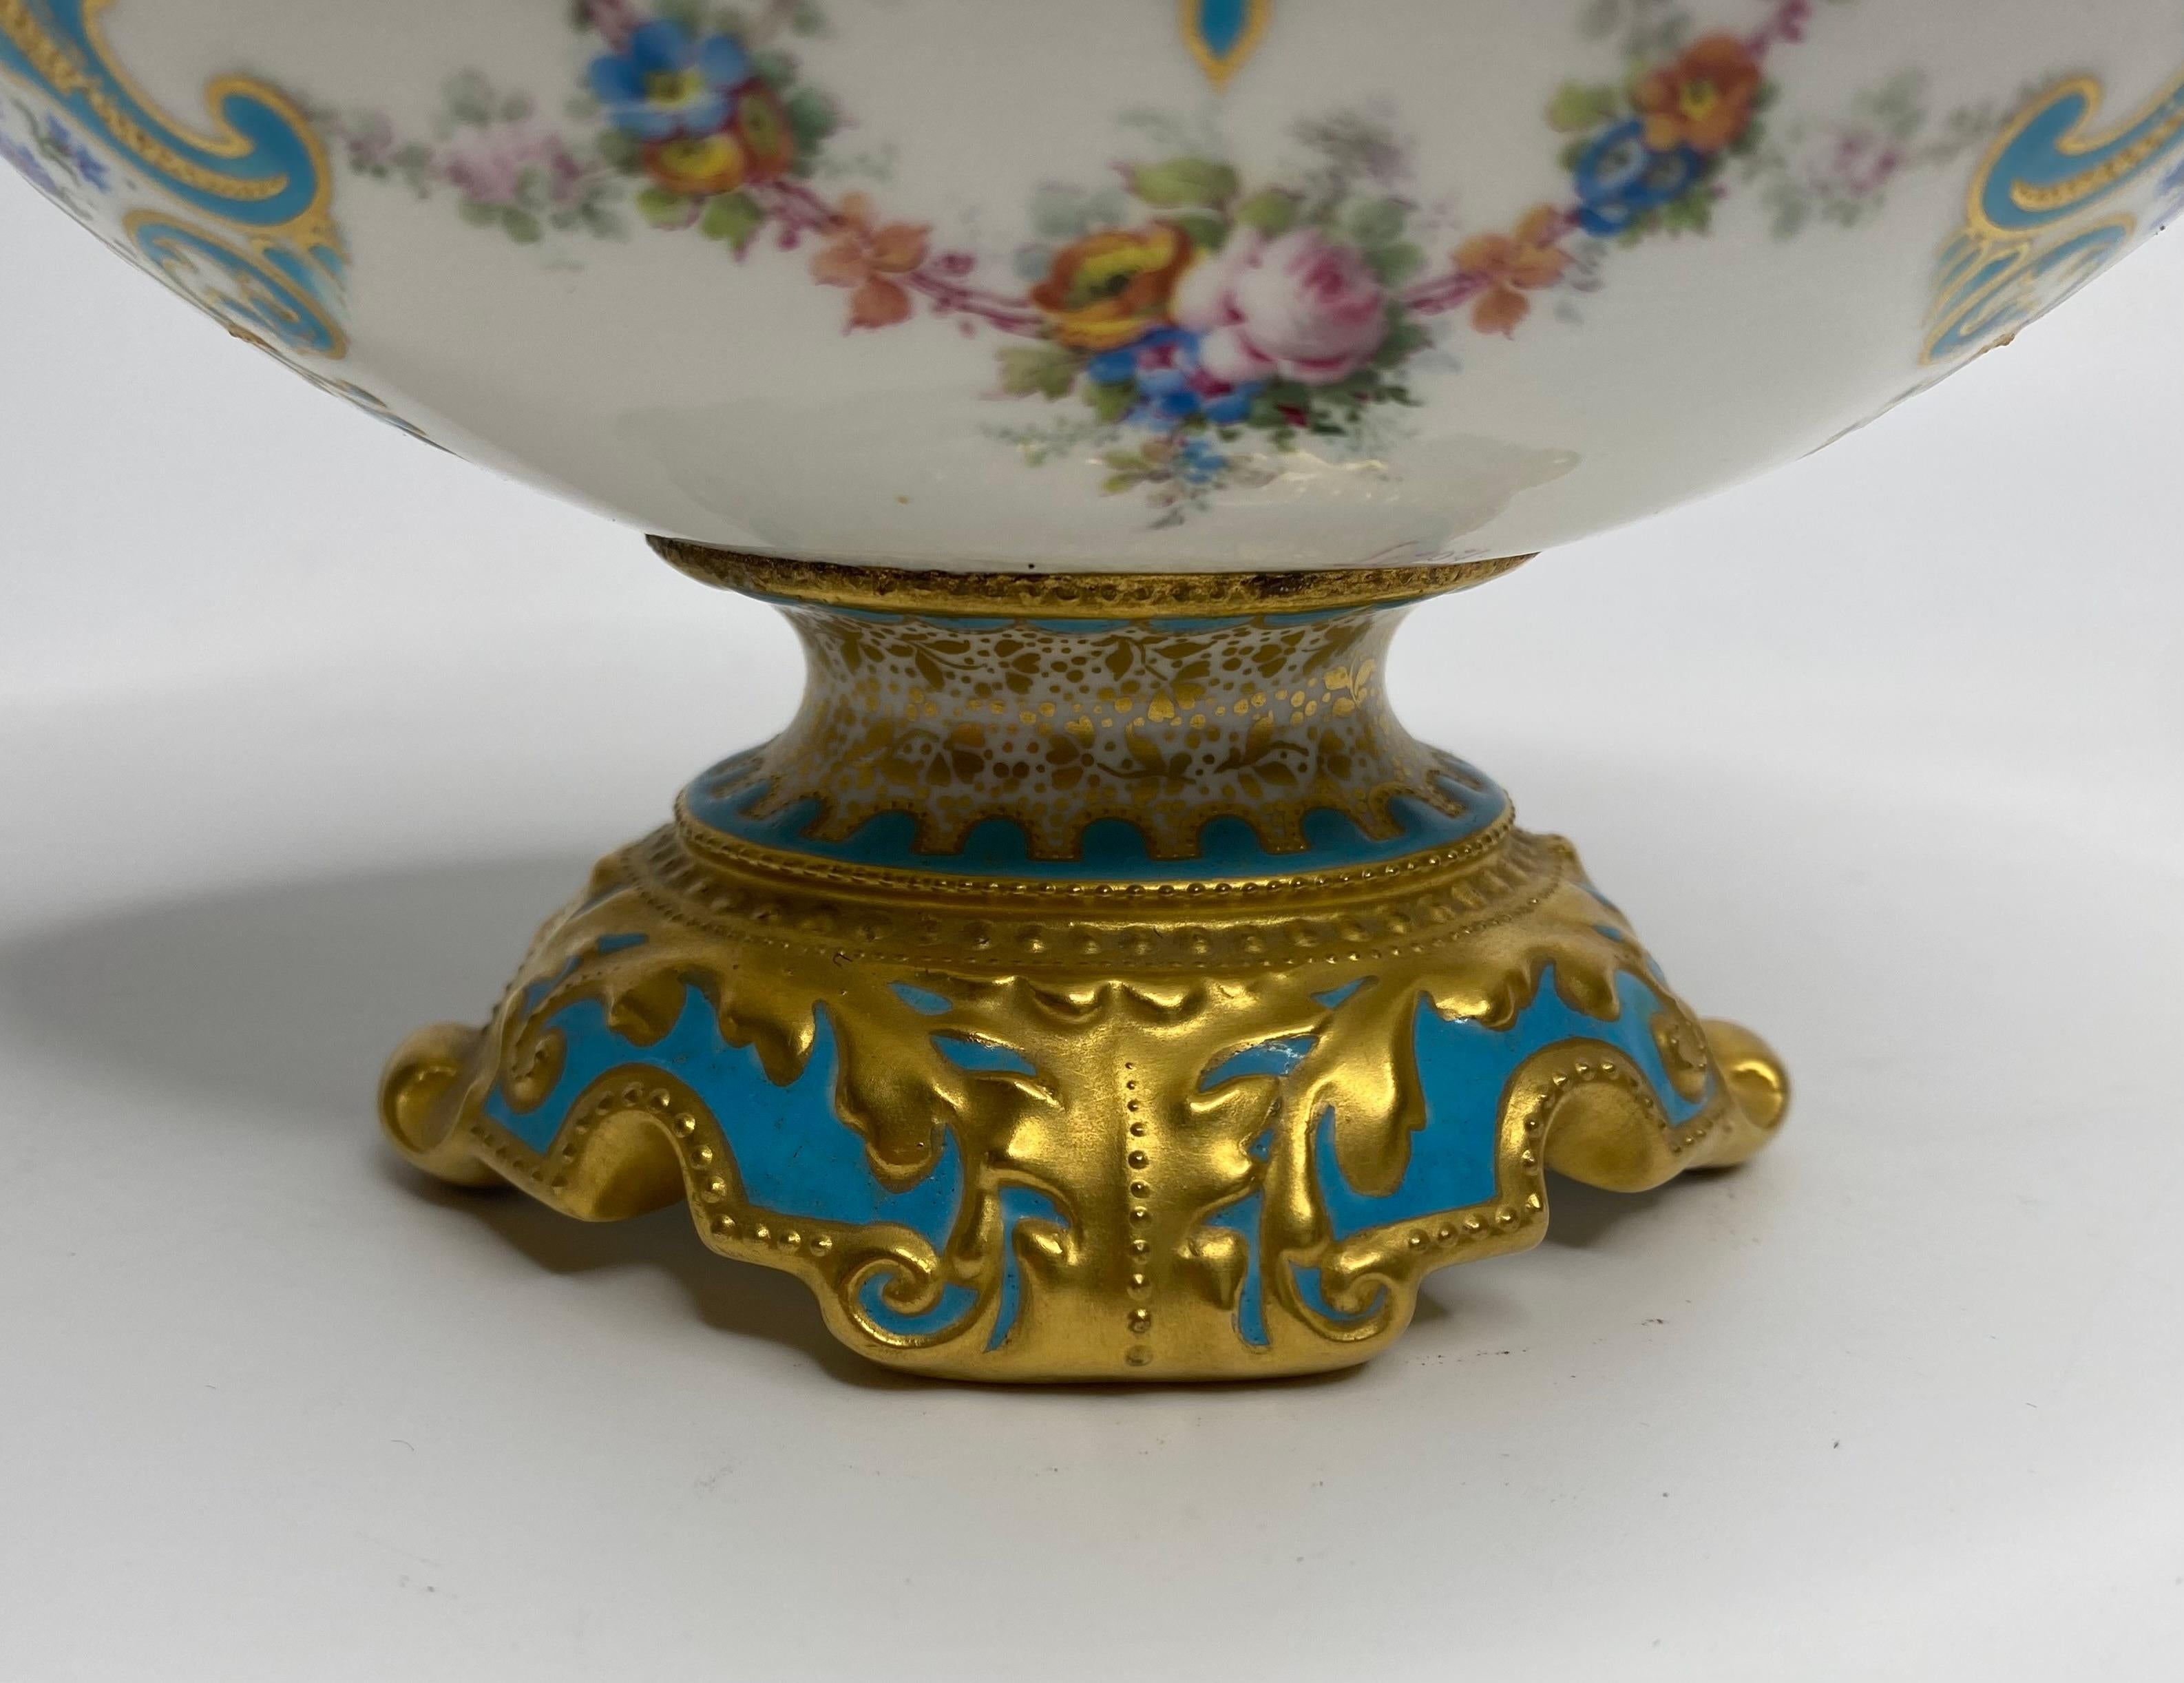 Early 20th Century Royal Crown Derby porcelain vase and cover. Desire Leroy, d. 1897. For Sale